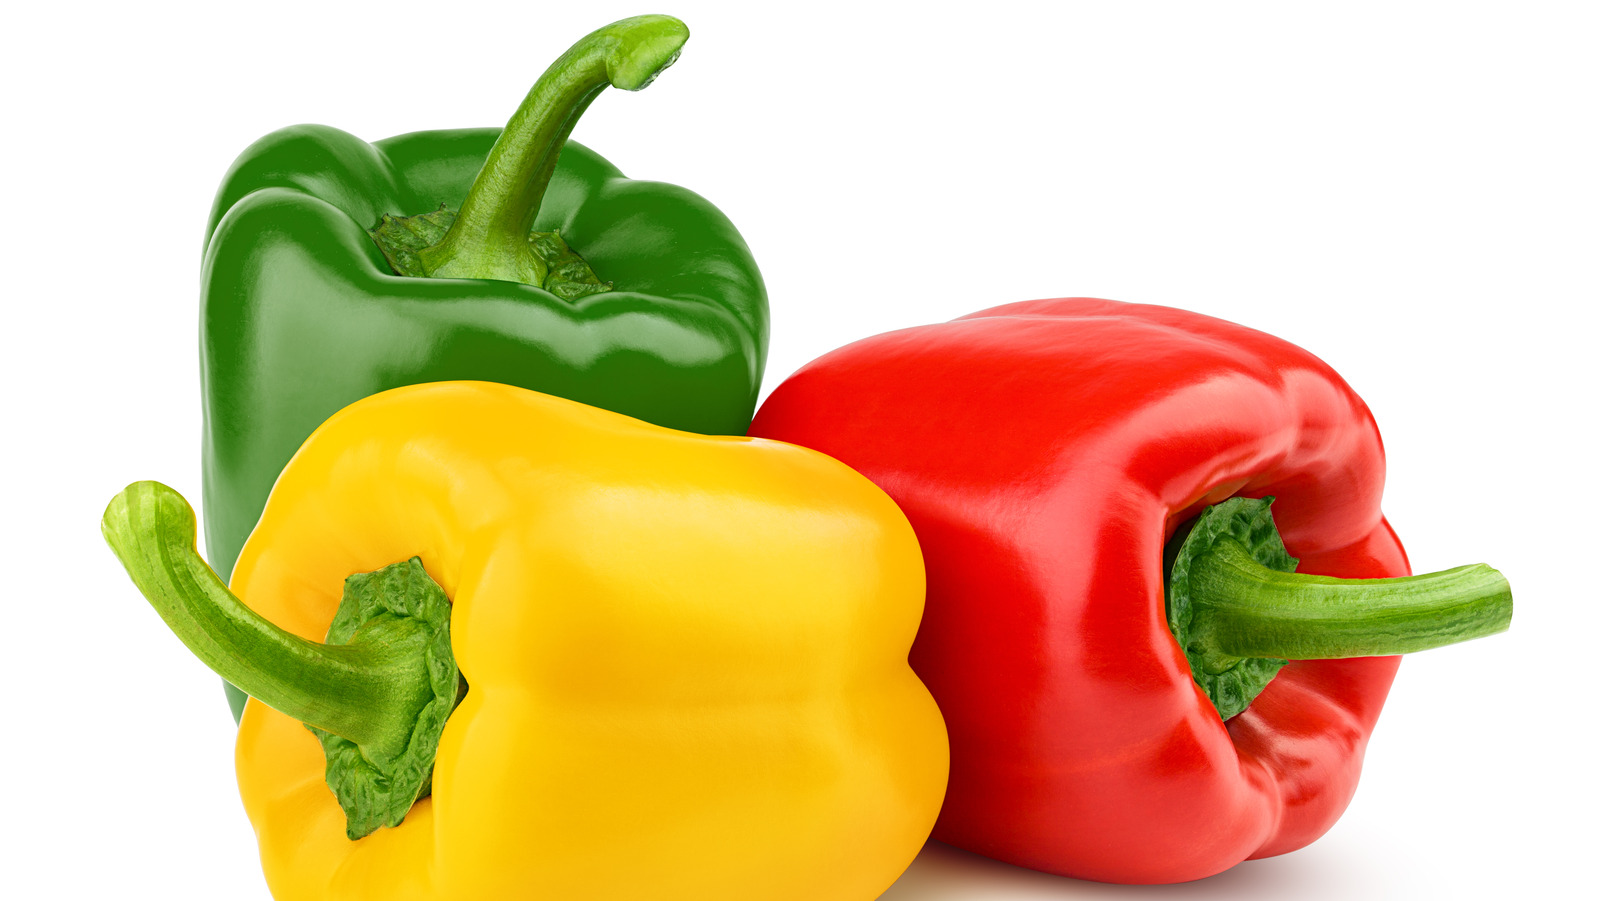 https://www.tastingtable.com/img/gallery/the-absolute-best-ways-to-keep-bell-peppers-fresh/l-intro-1659283405.jpg